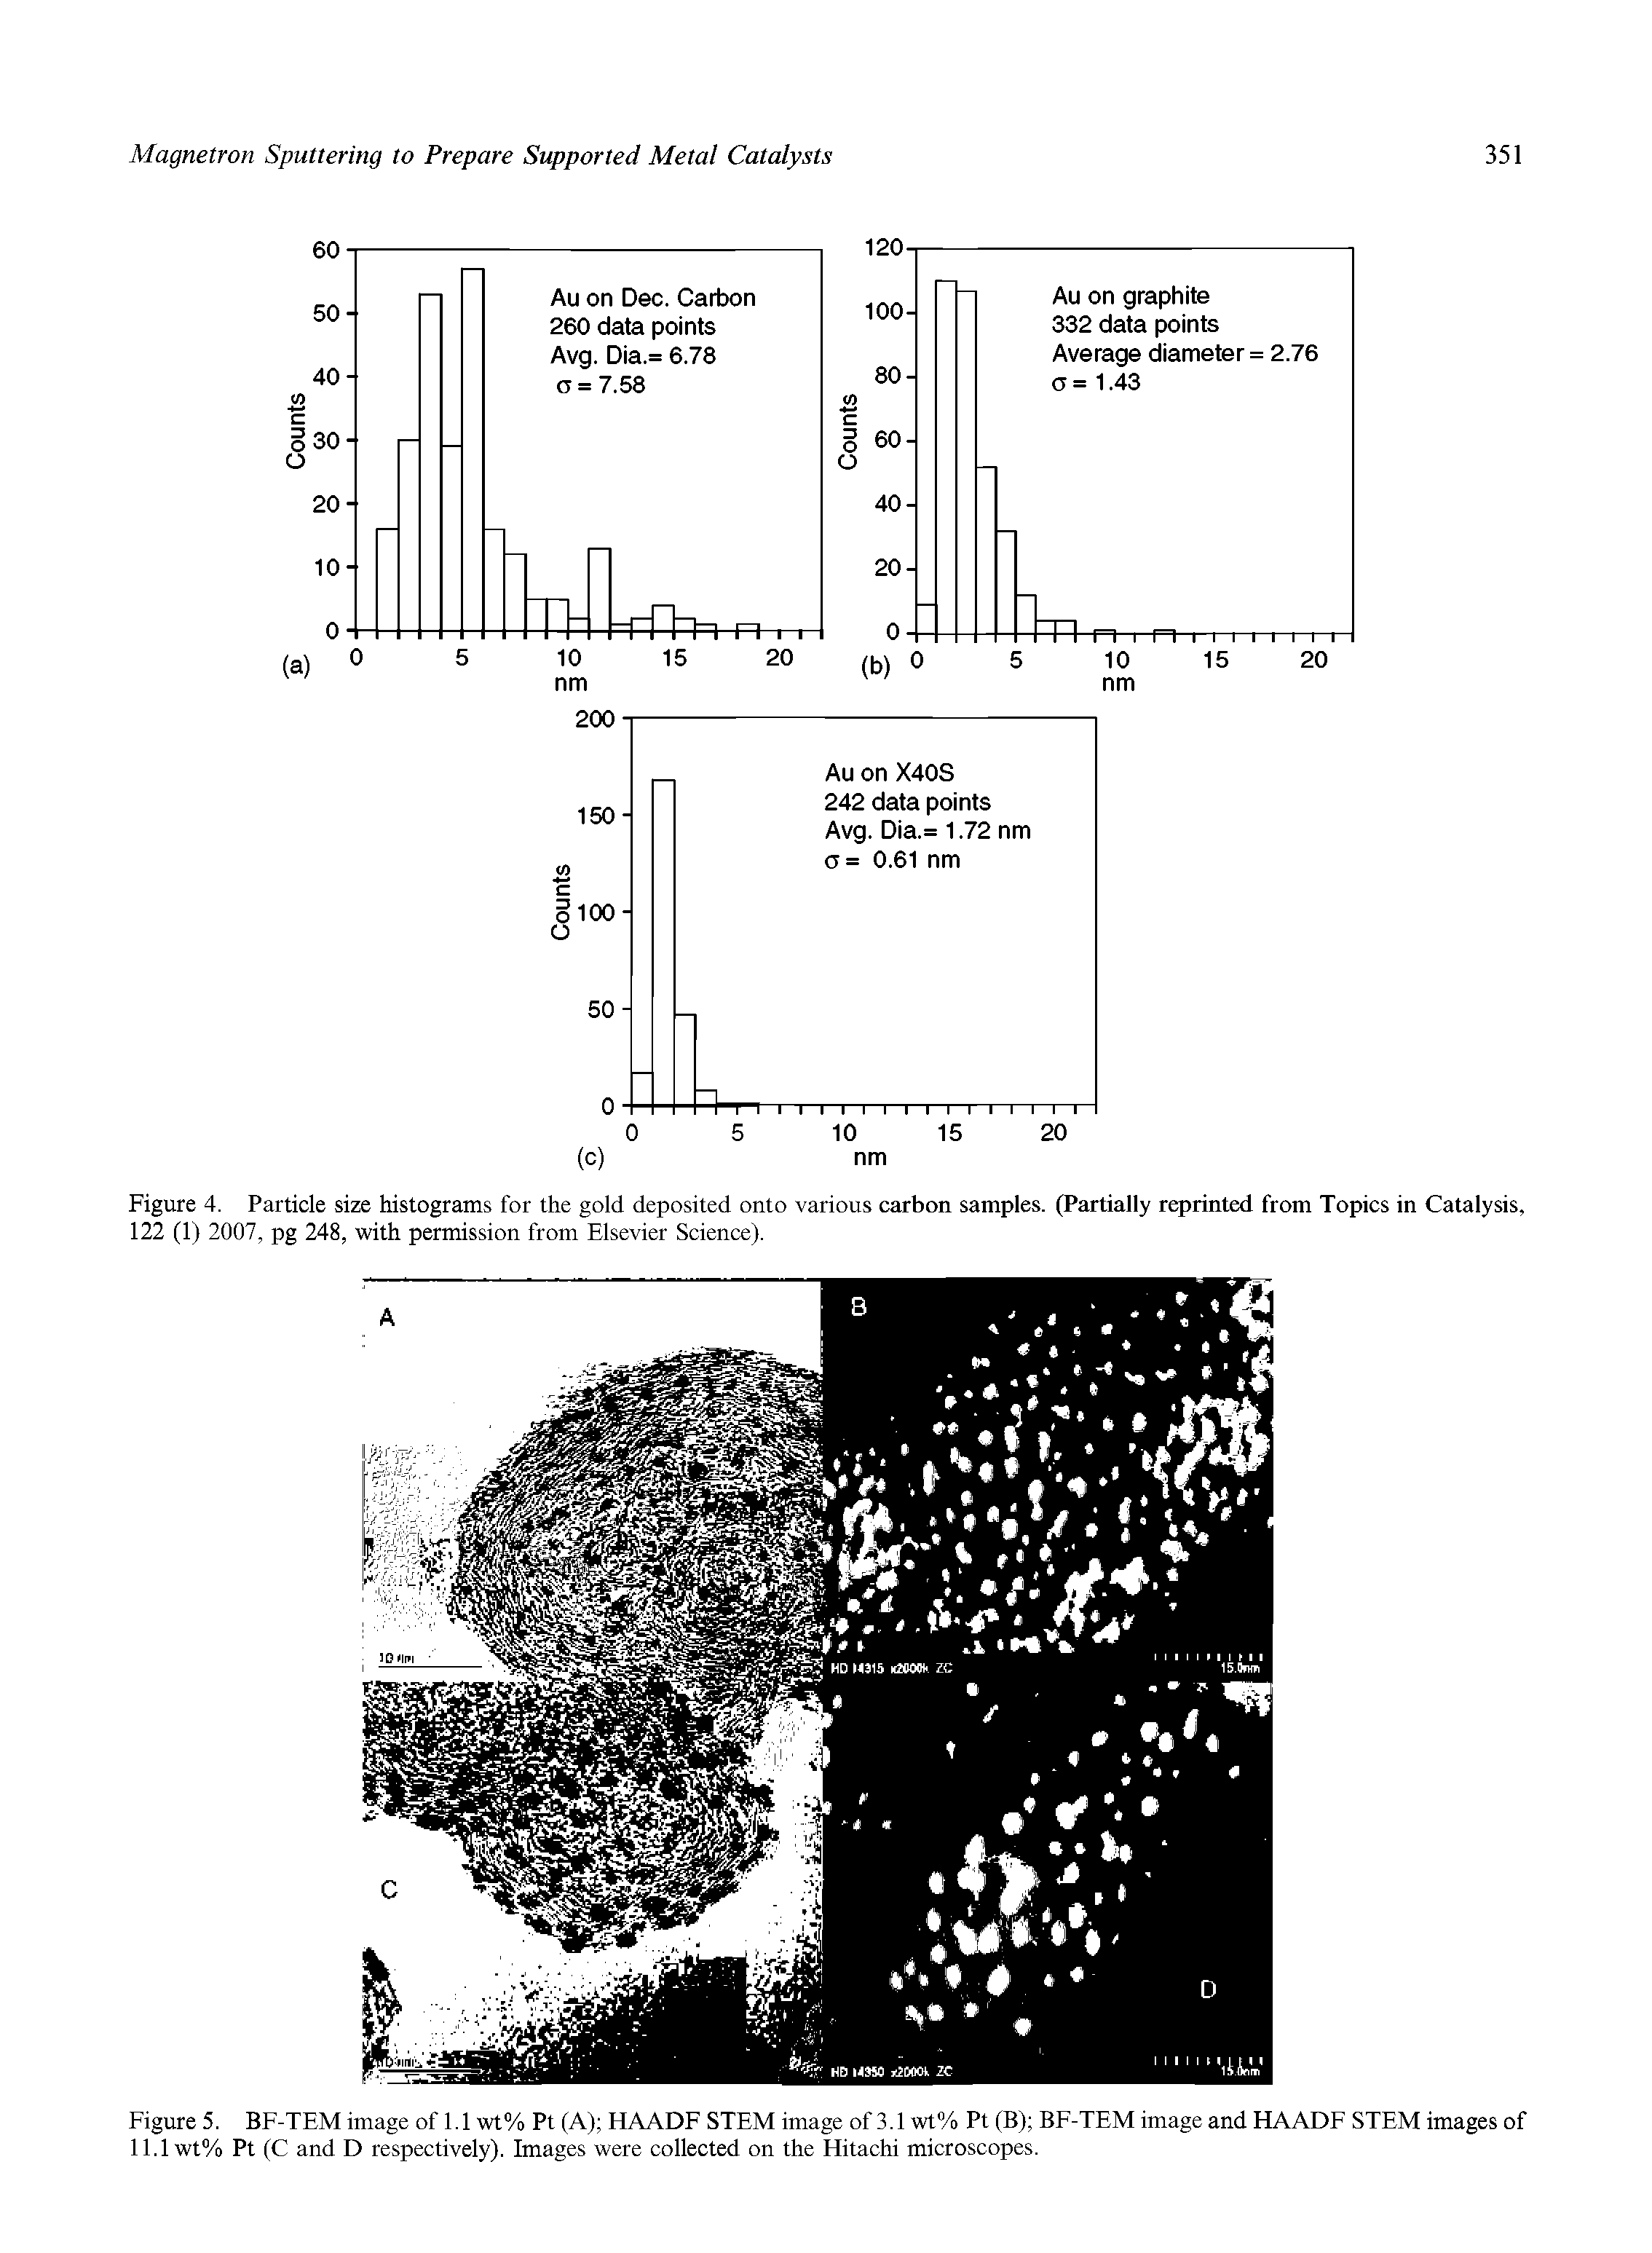 Figure 4. Particle size histograms for the gold deposited onto various carbon samples. (Partially reprinted from Topics in Catalysis, 122 (1) 2007, pg 248, with permission from Elsevier Science).